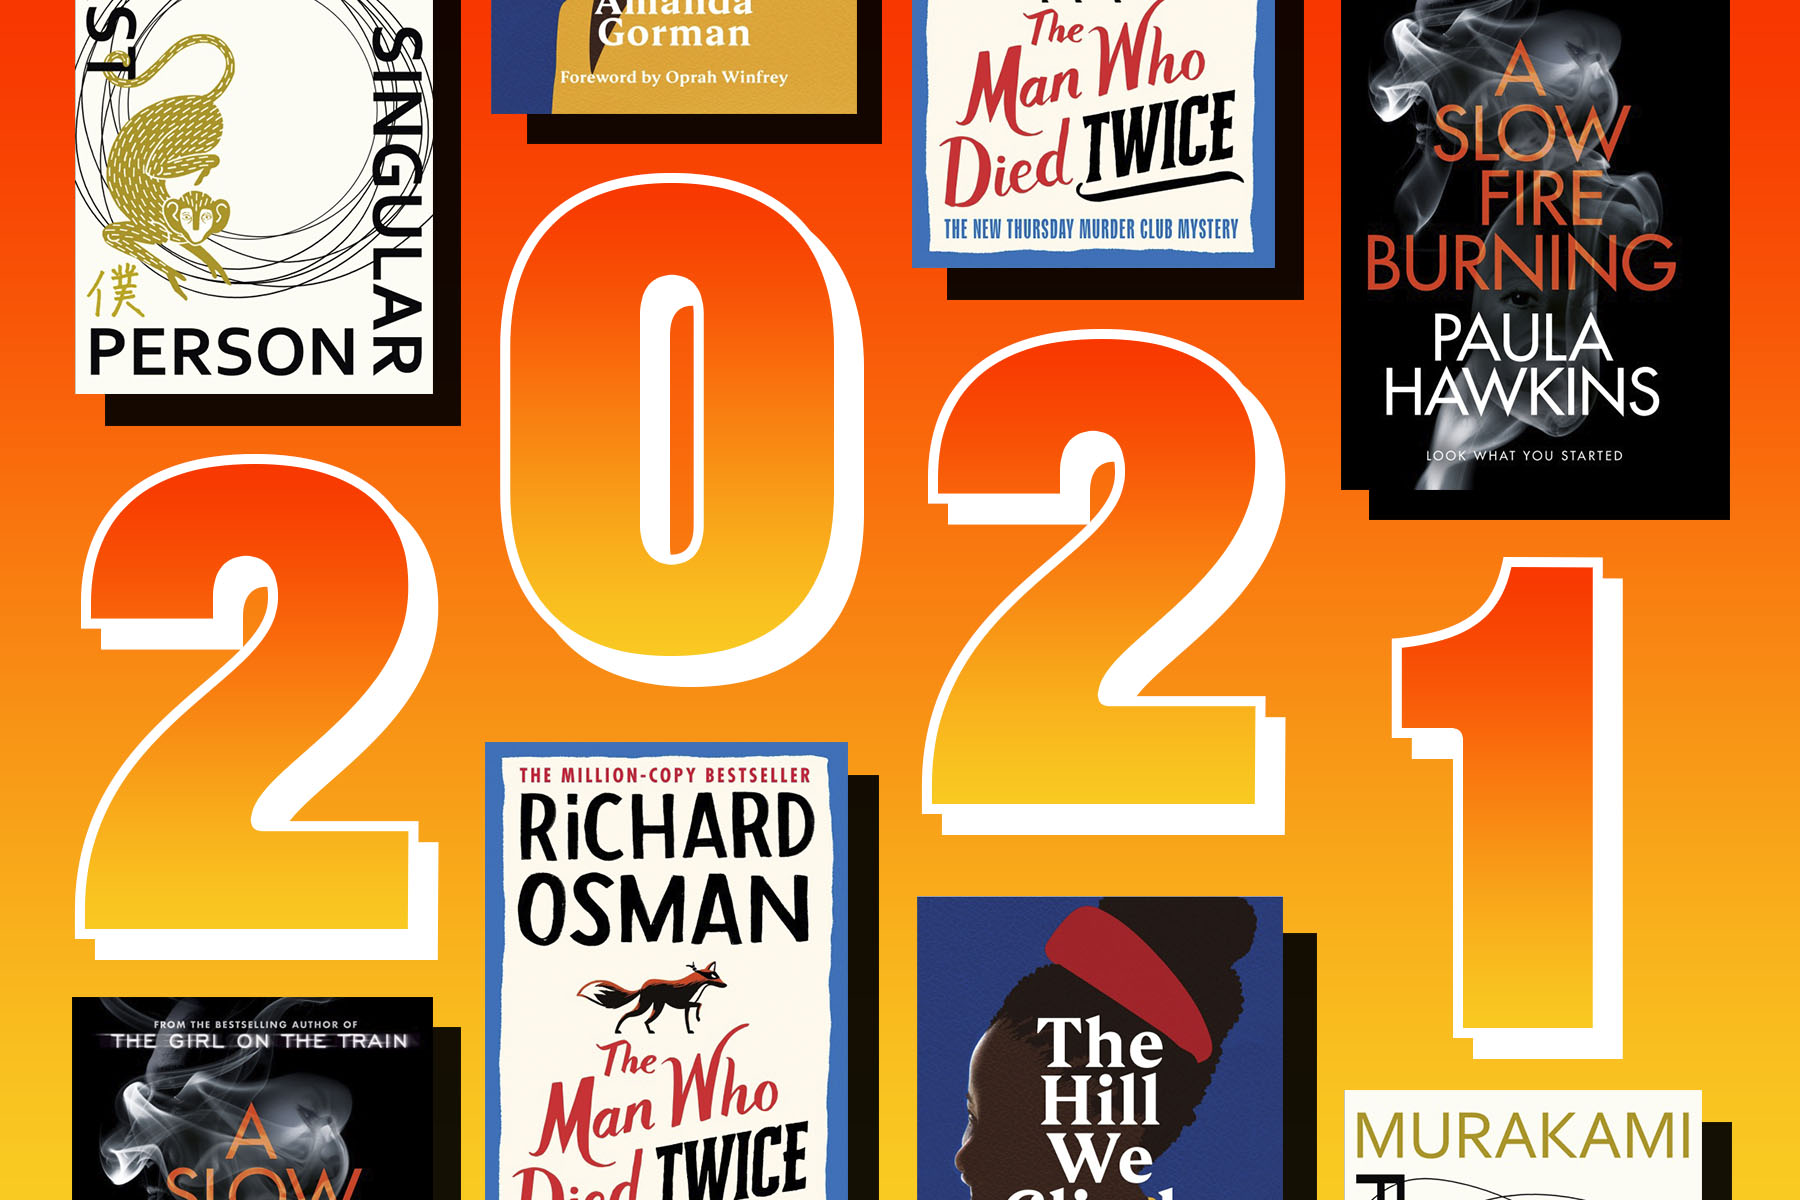 2021 written in block numerals on an orange background, with various book covers above and below it.